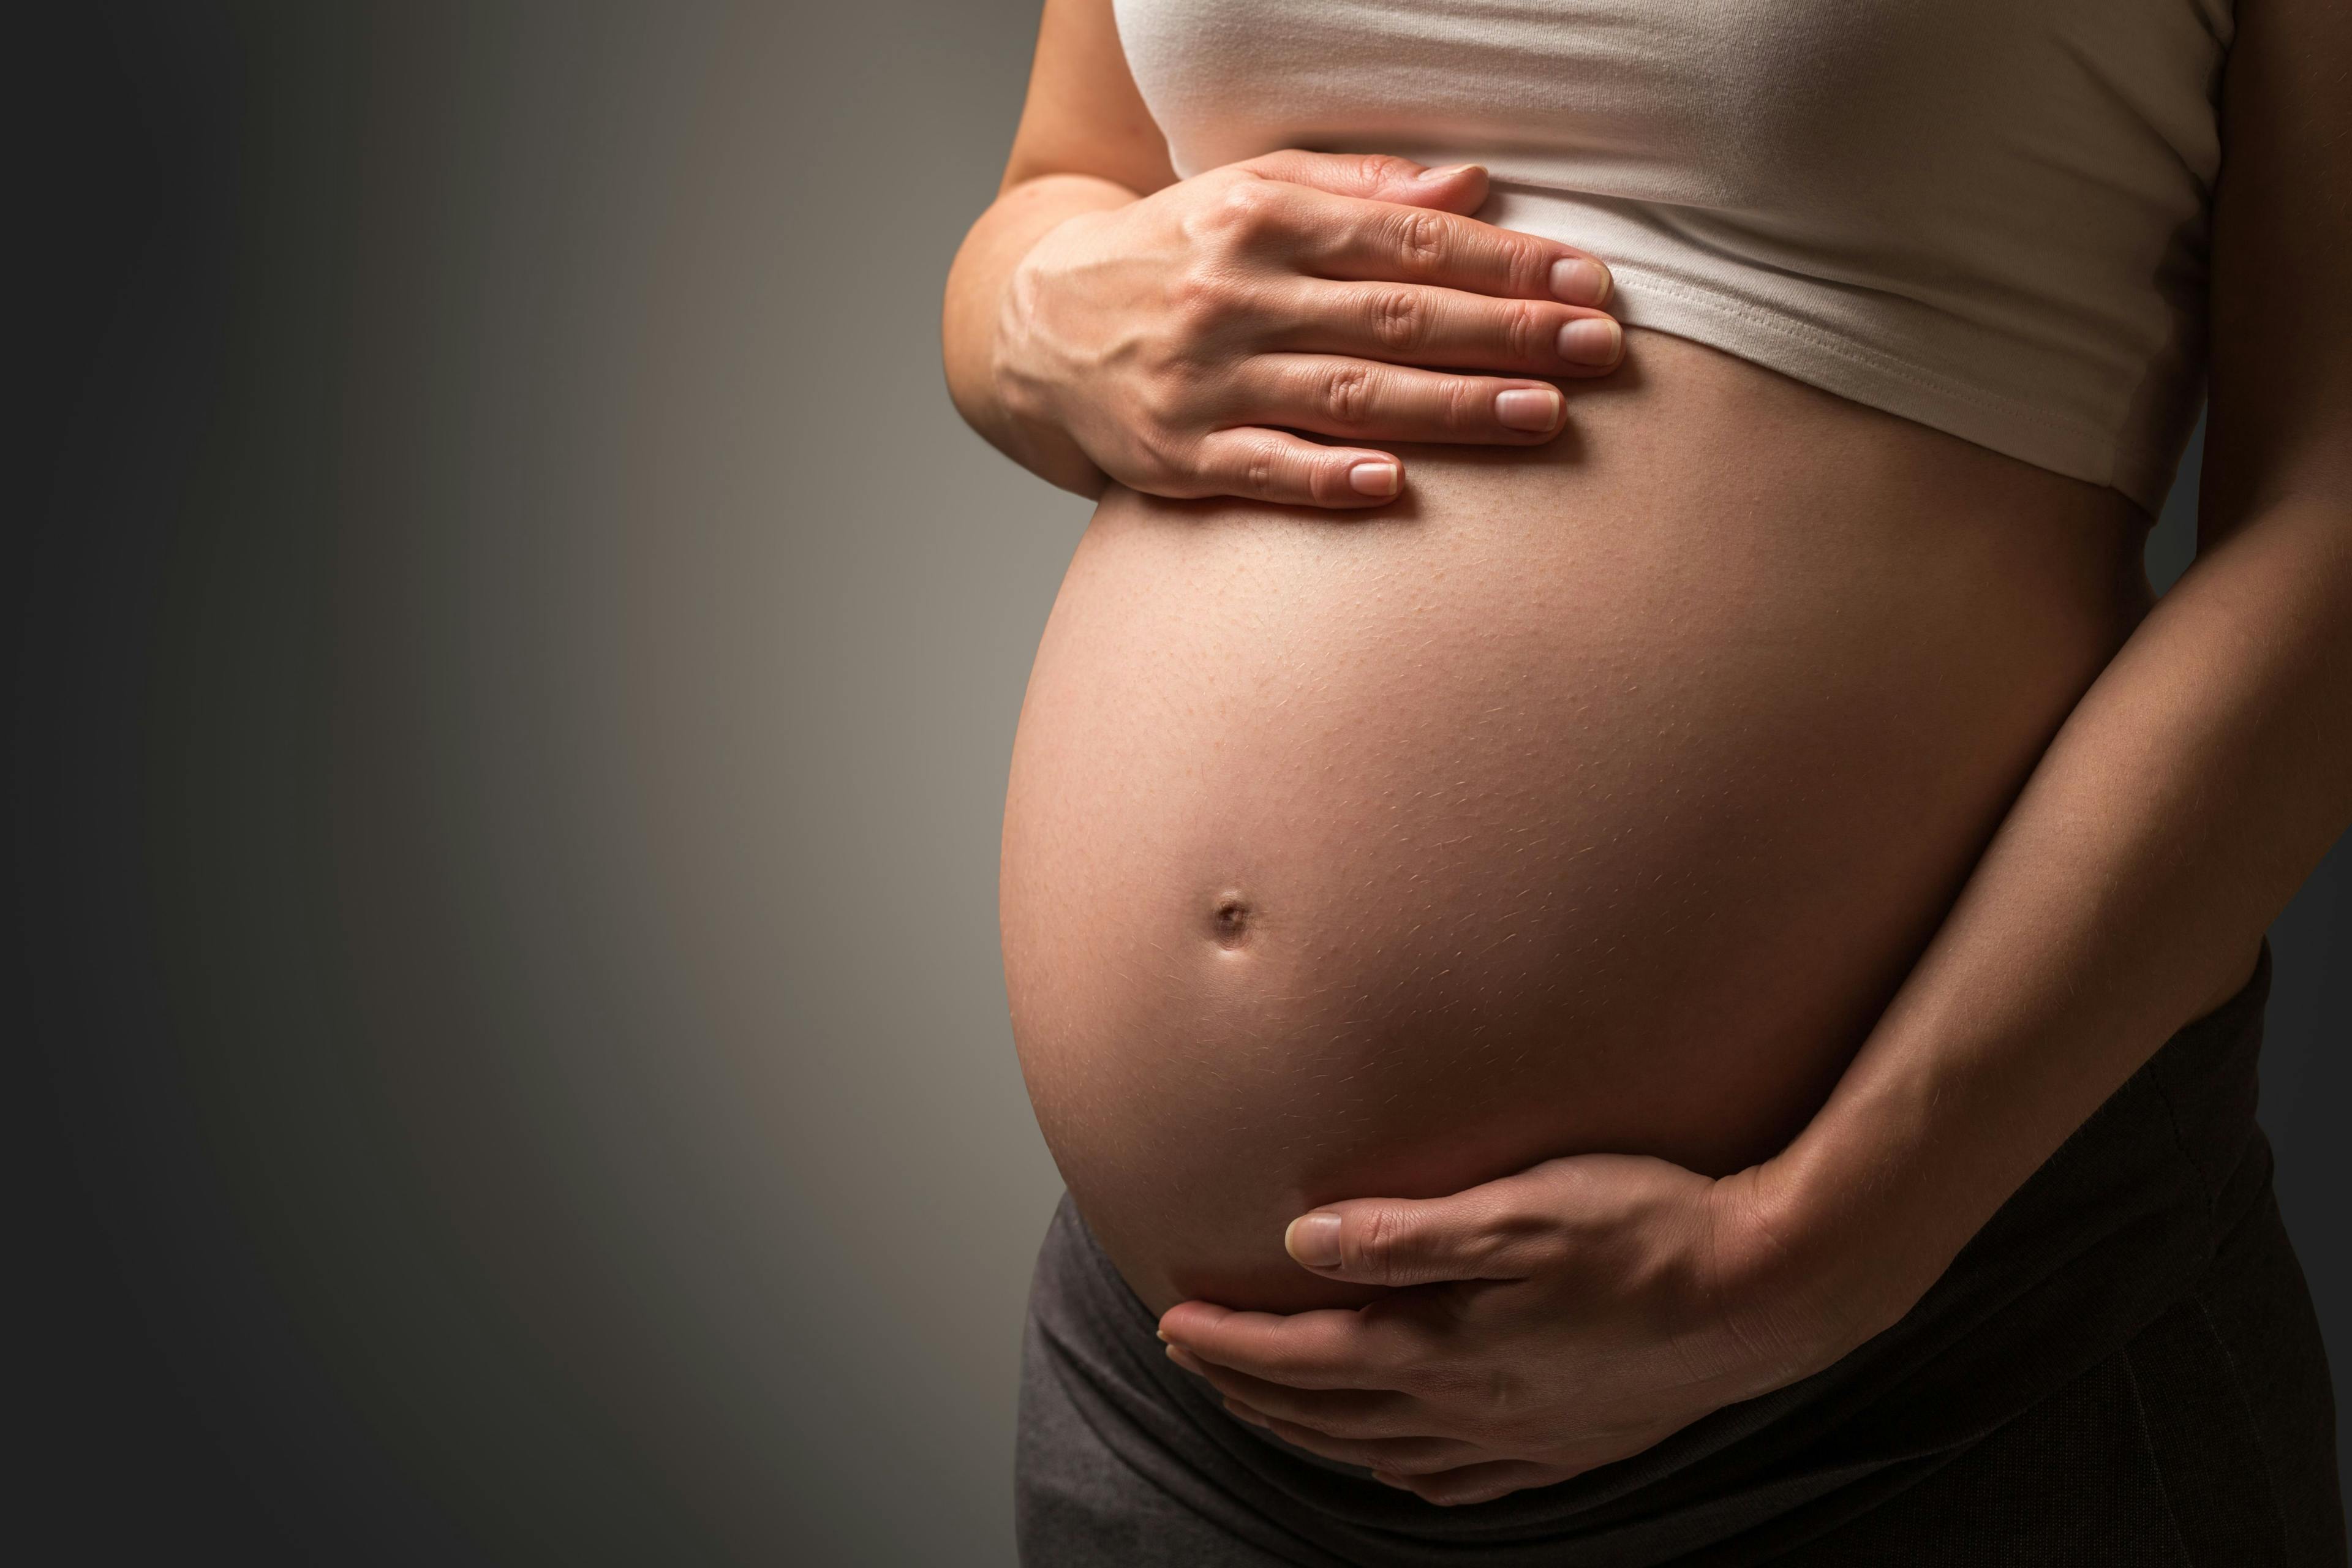 Women with PCOS at Increased Risk of Pregnancy-Associated Cardiometabolic Complications